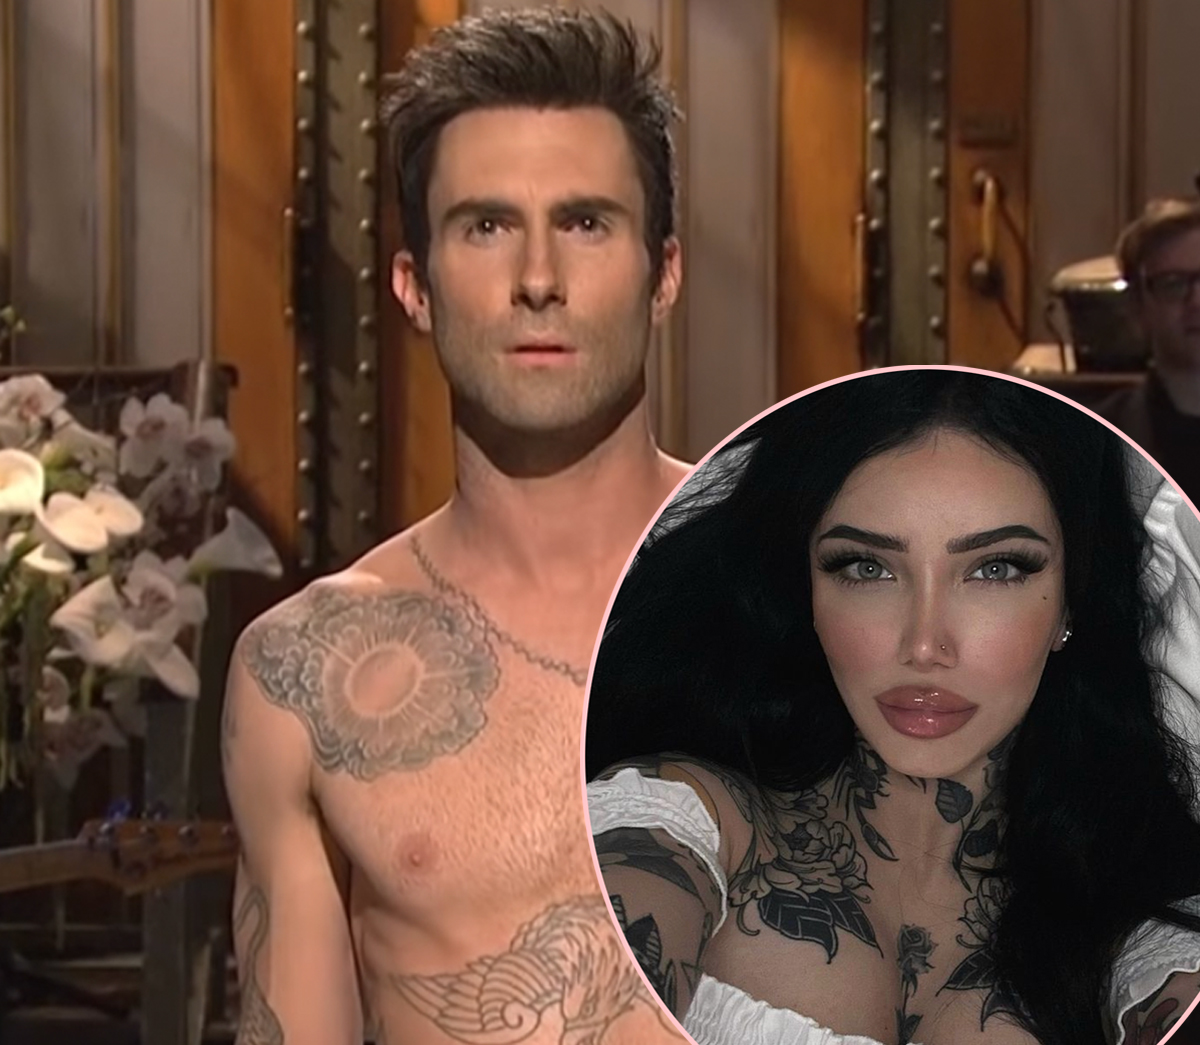 Adam Levine Allegedly Sent IG Model Maryka Naked Selfie While They Were Sexting En